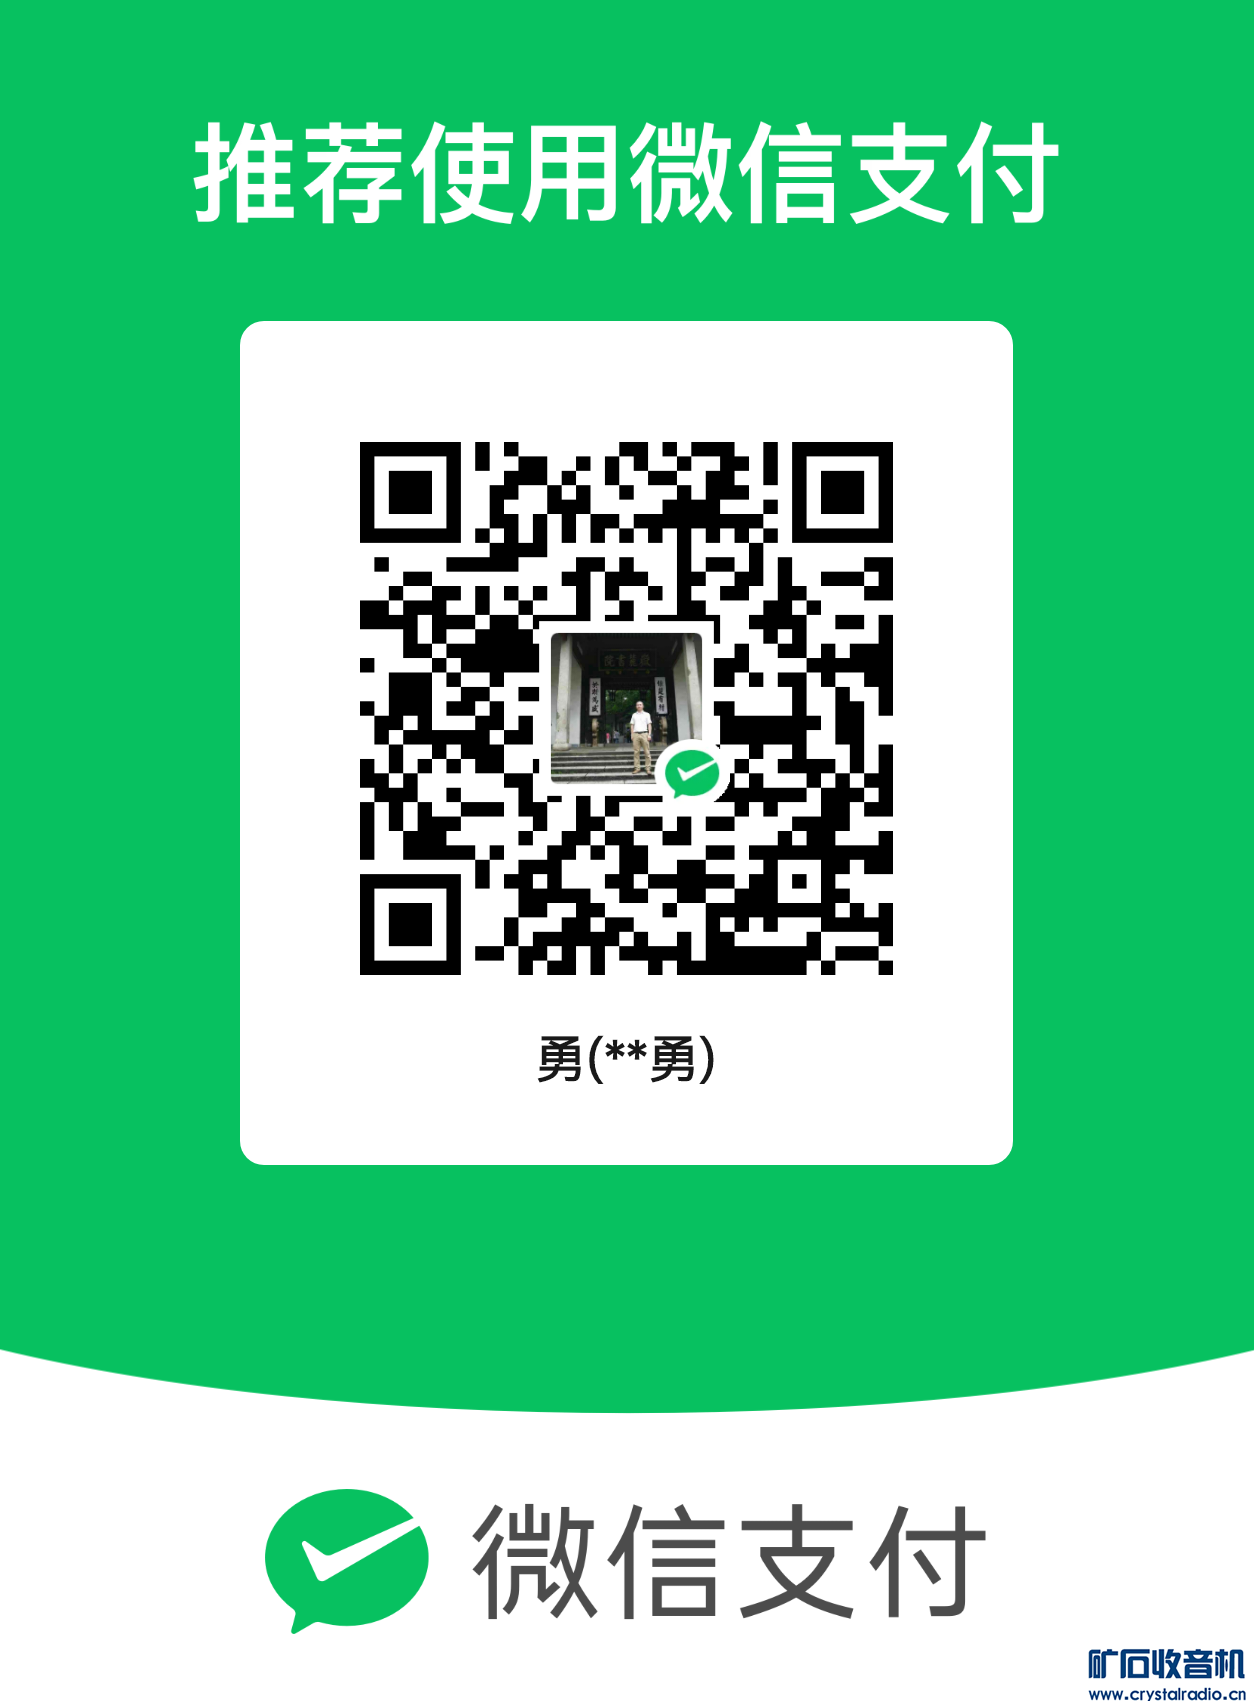 mm_facetoface_collect_qrcode_1708354206170.png